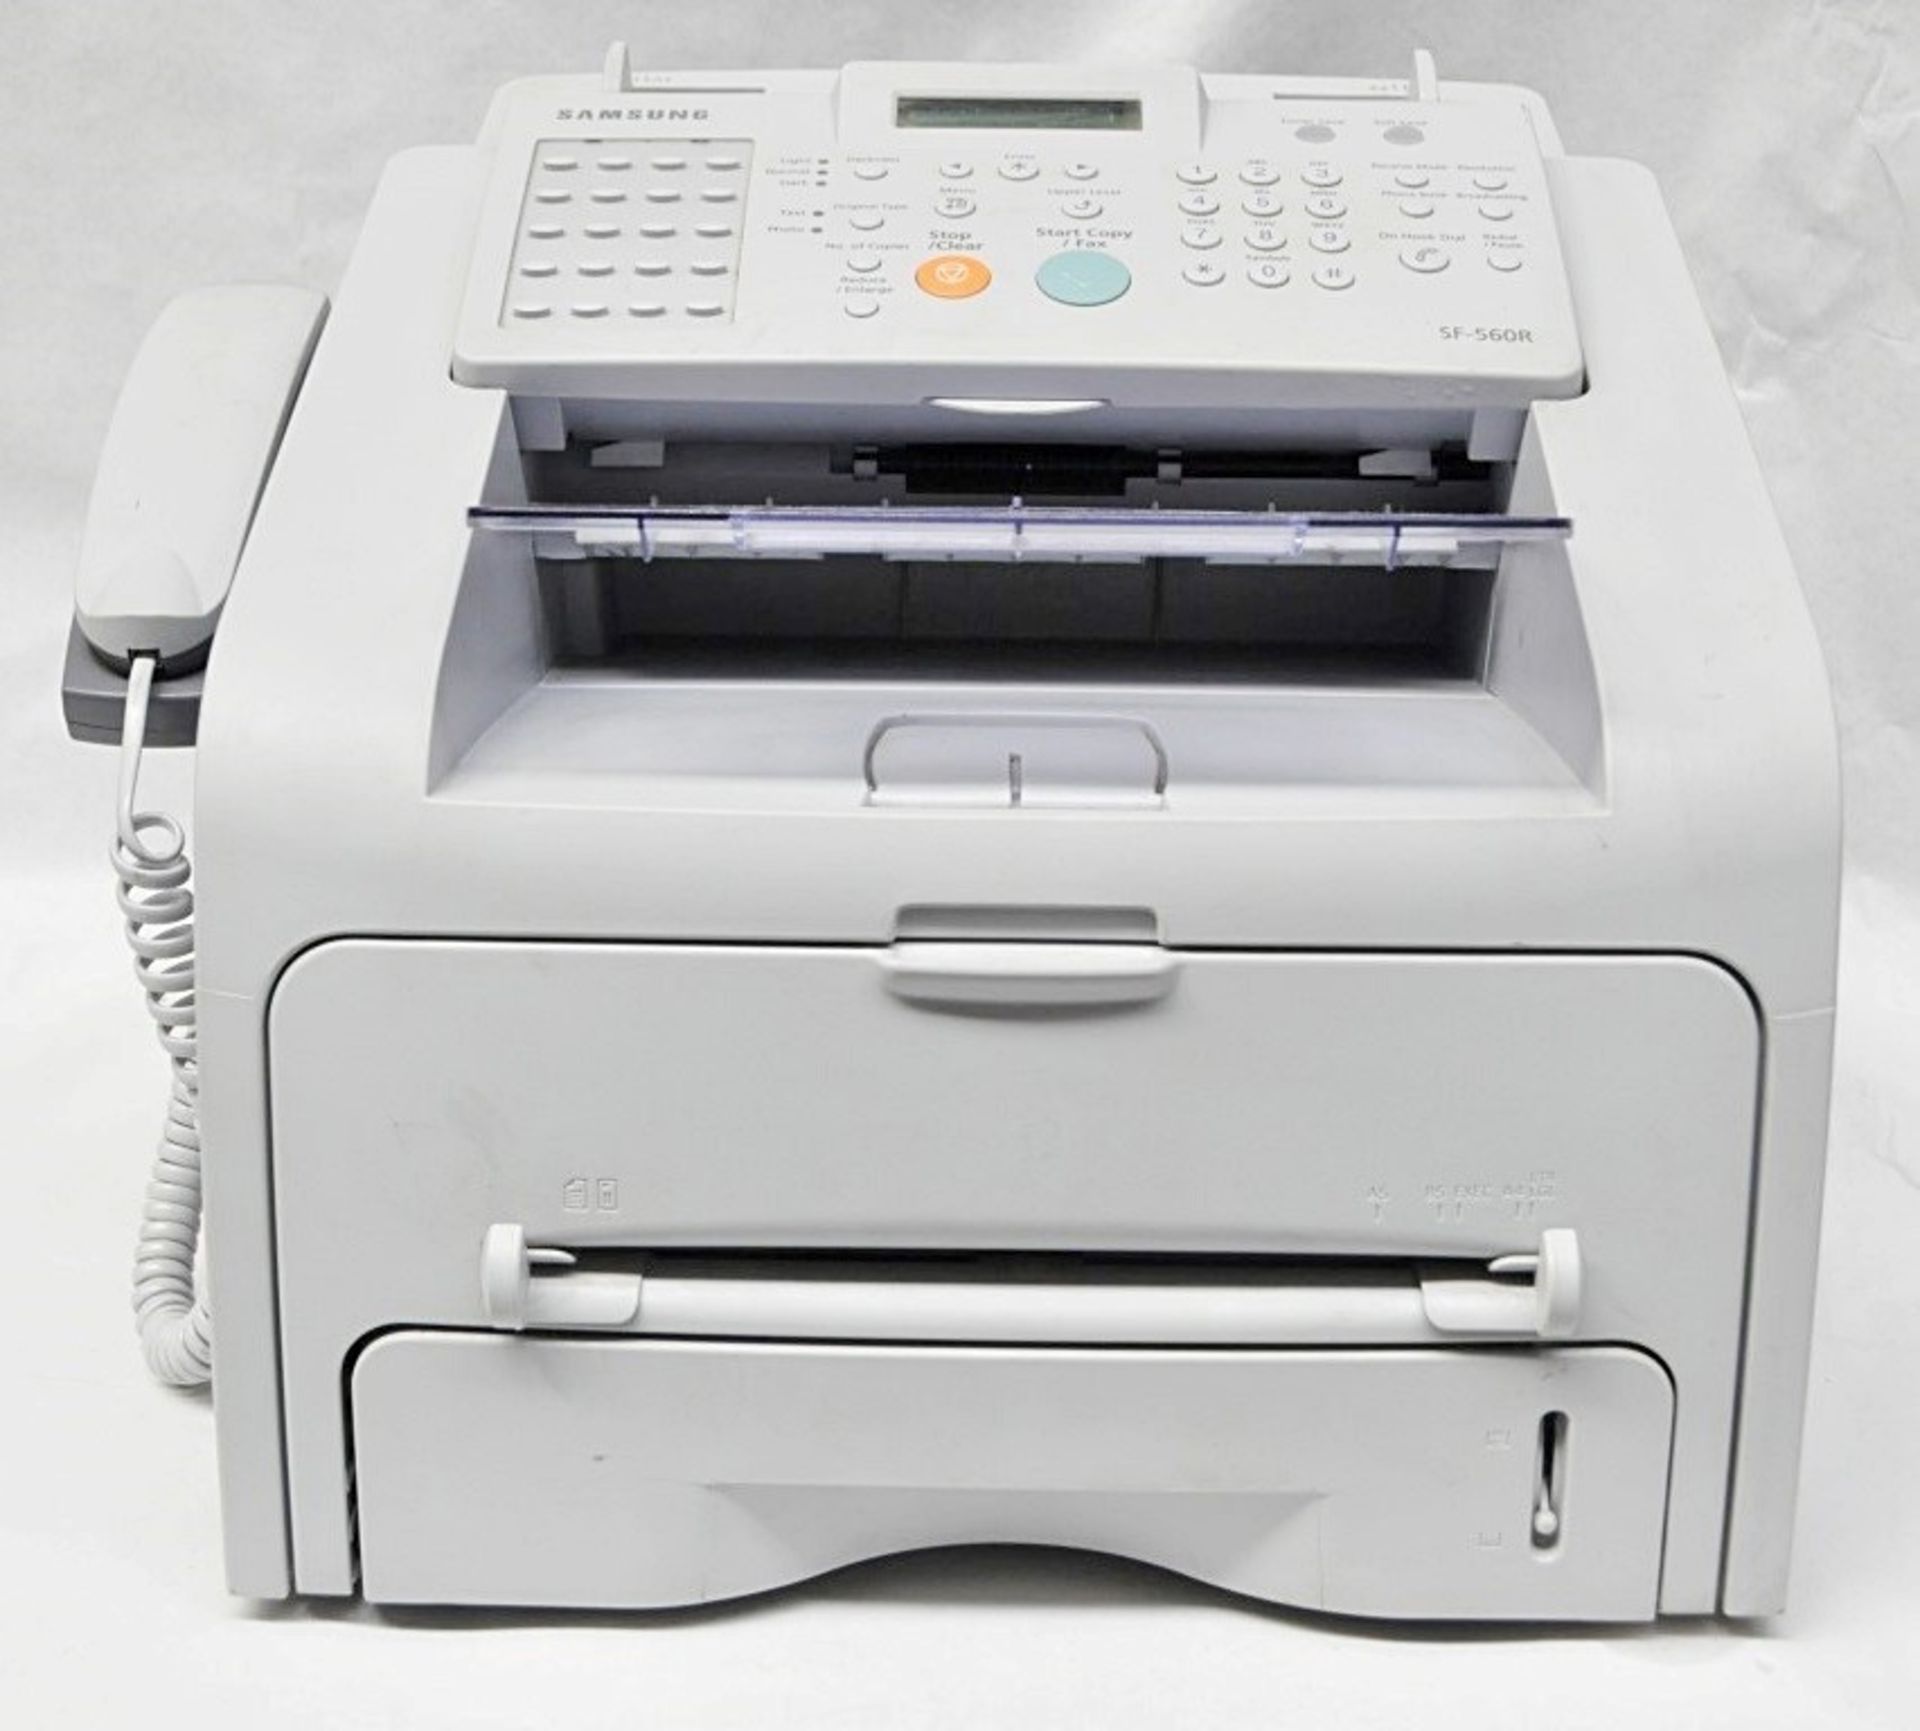 1 x Samsung SF-S60R Office Fax Machine / A4 Copier - Taken From A Working Office Environment - PRO16